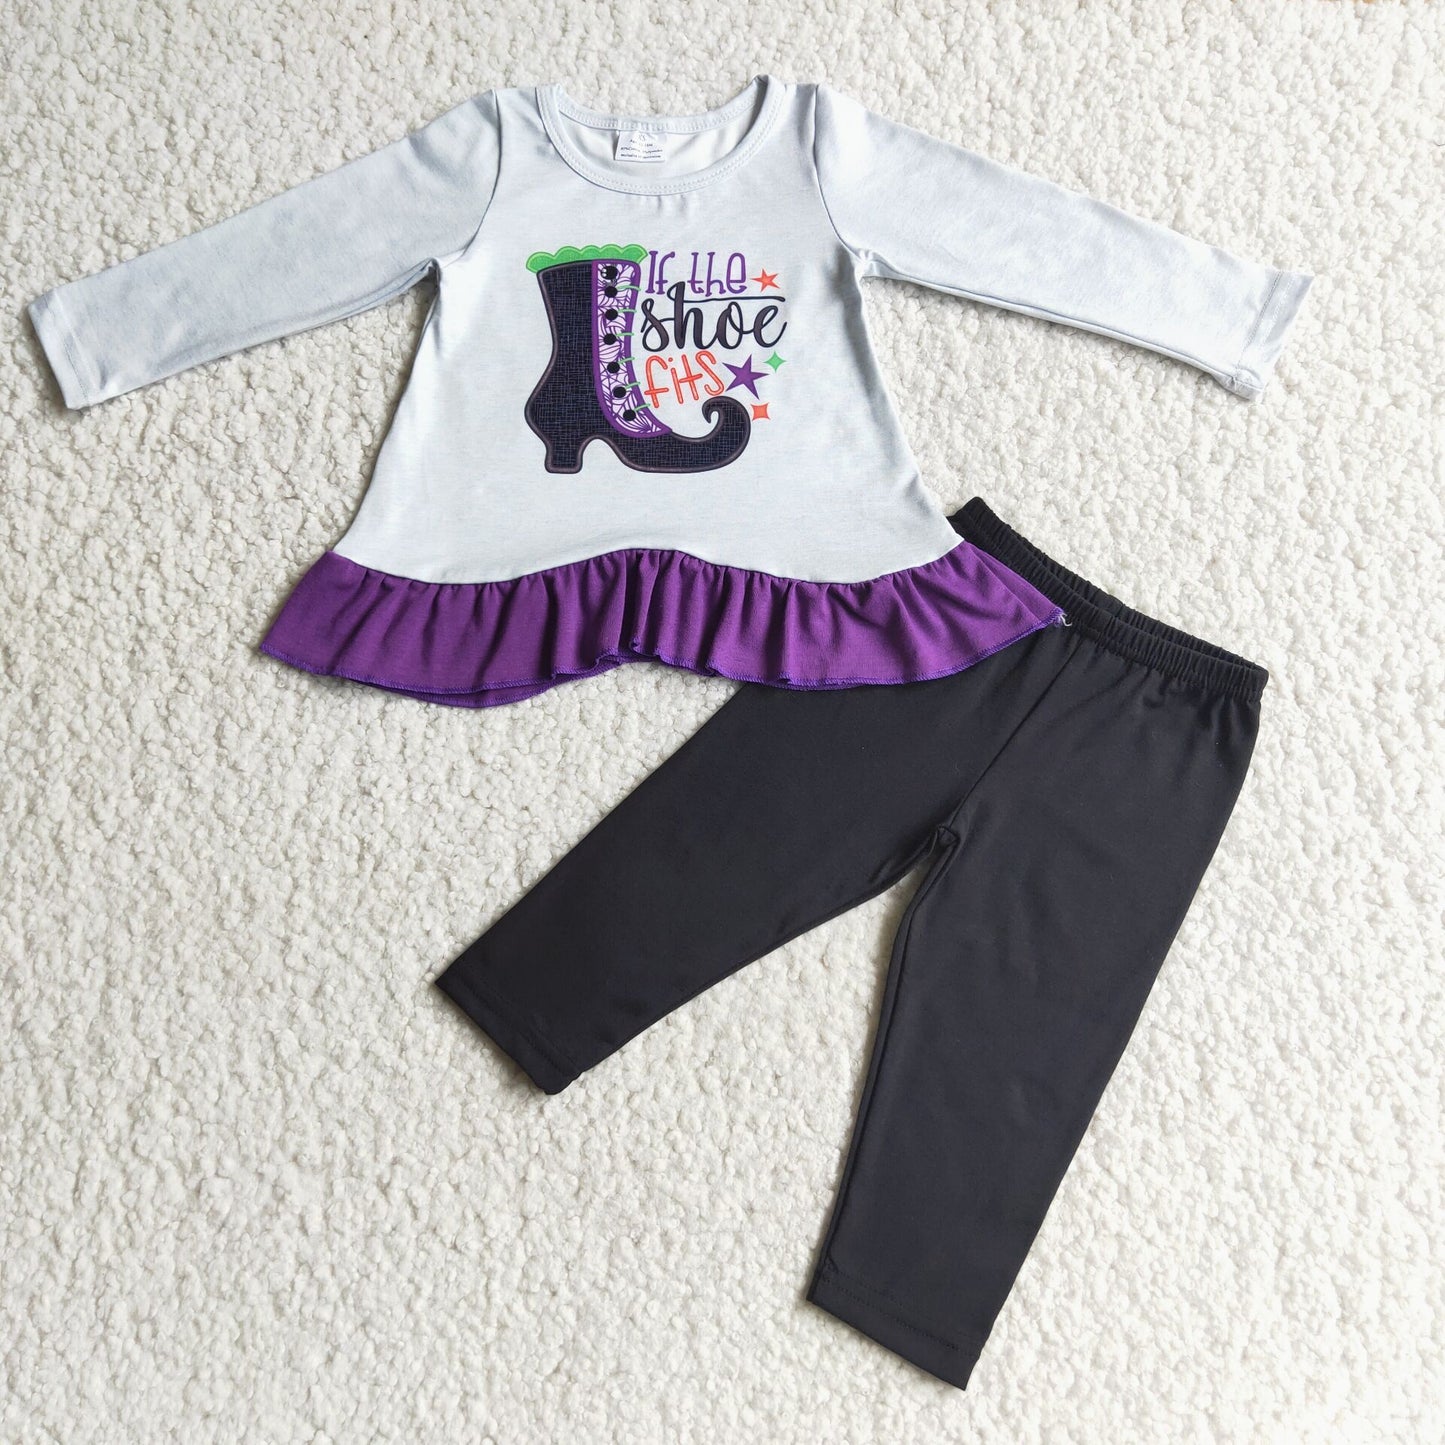 Baby girls long sleeve Halloween outfit